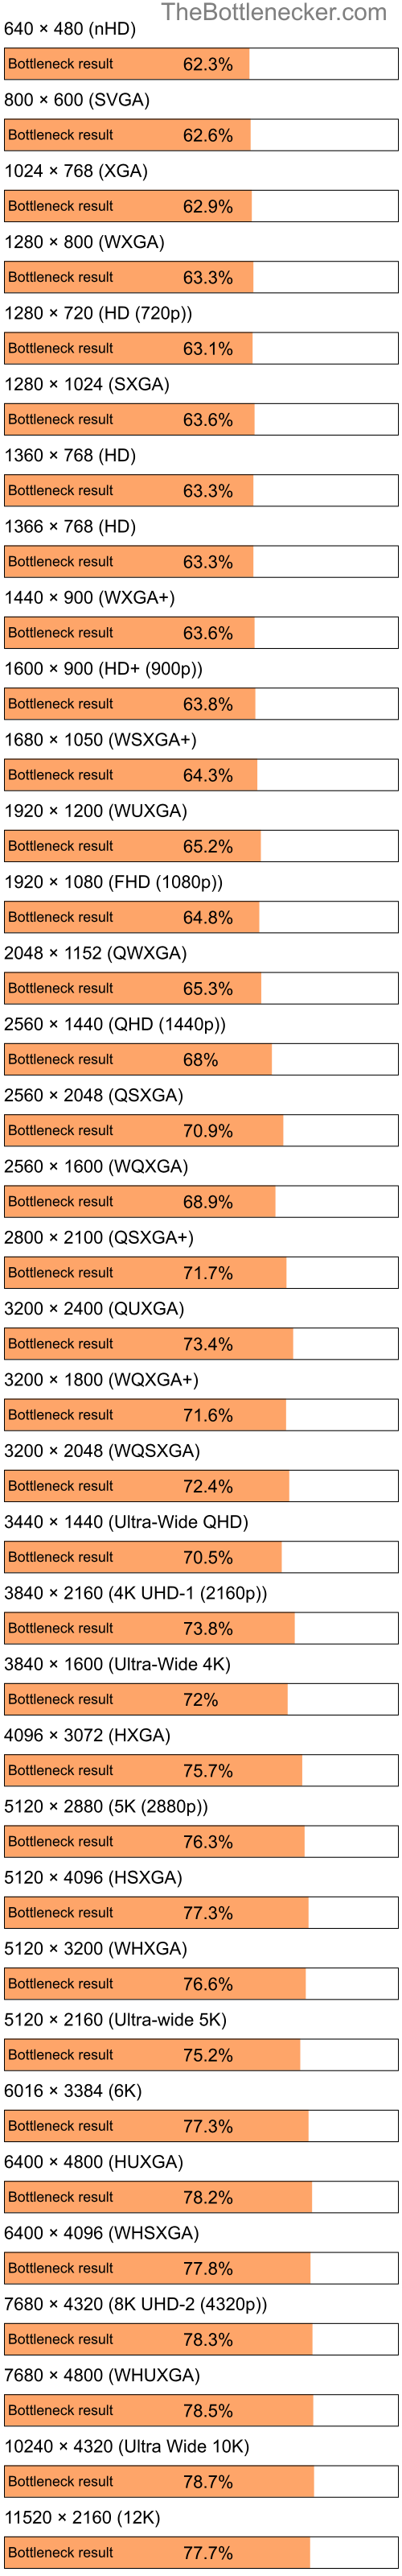 Bottleneck results by resolution for Intel Pentium 4 and AMD Mobility Radeon HD 2400 XT in7 Days to Die